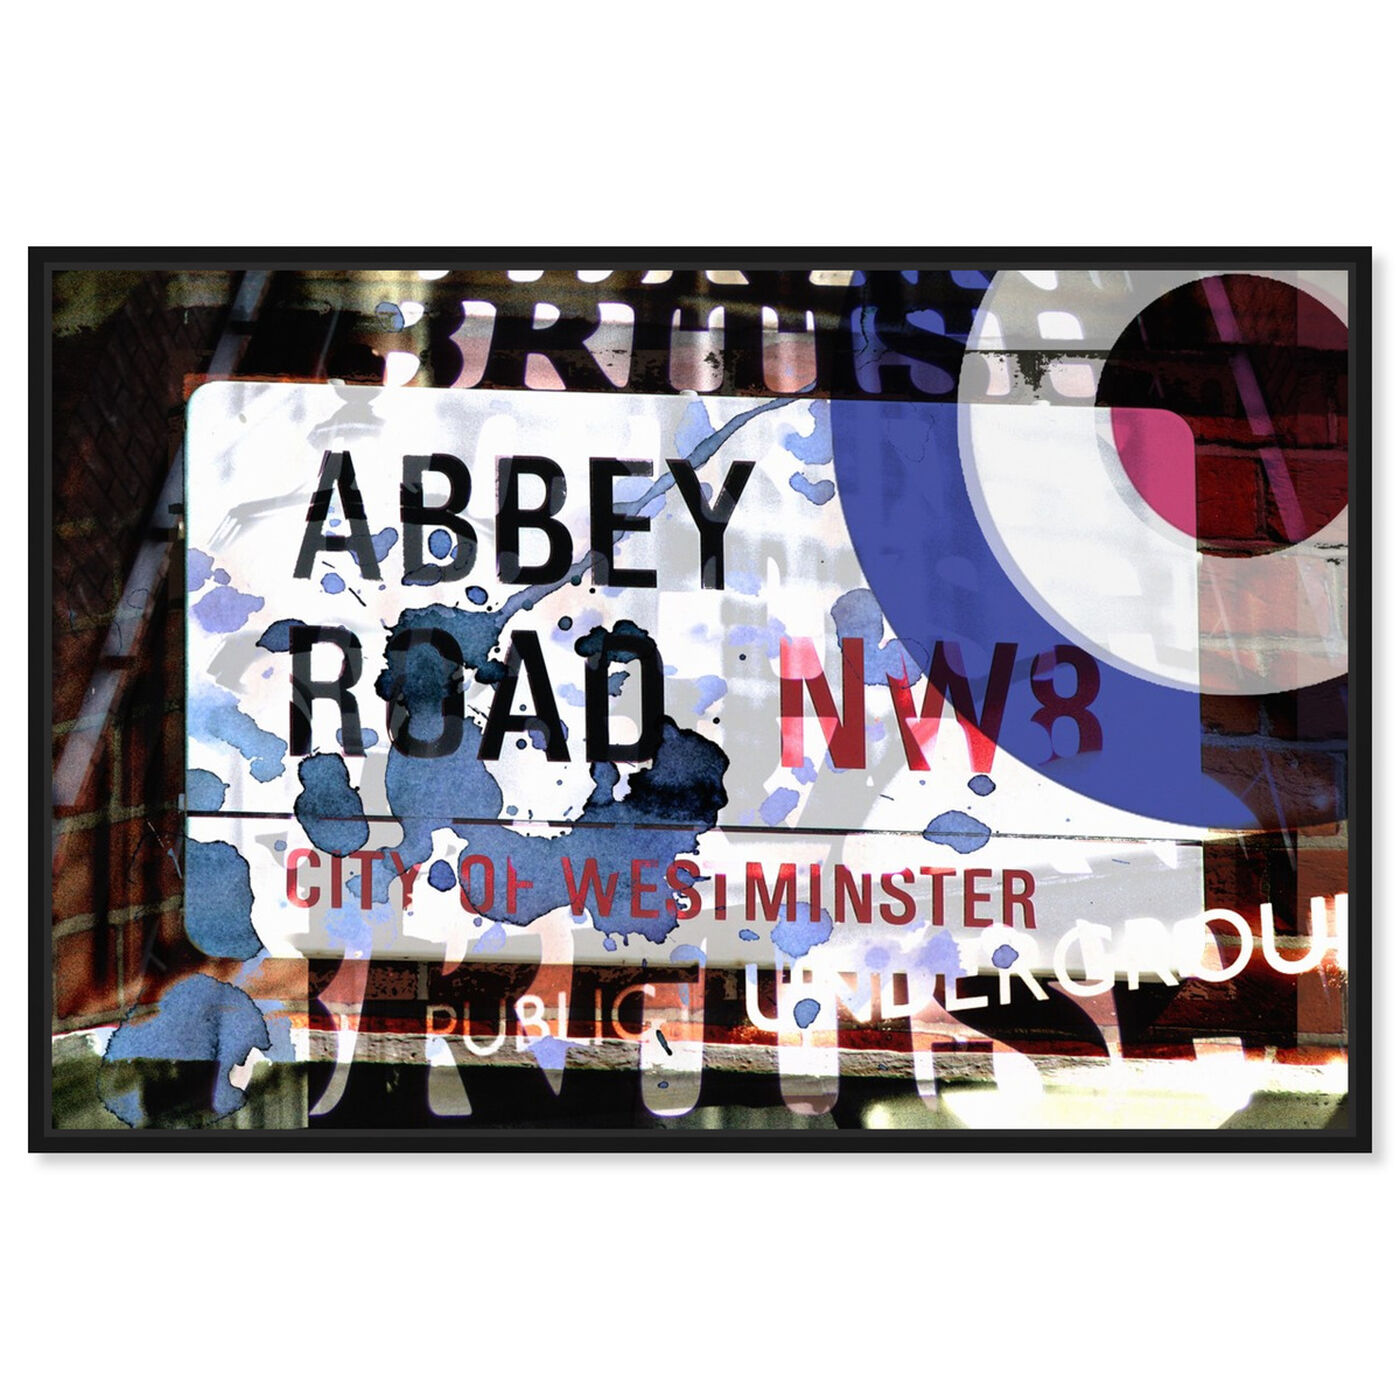 Front view of Abbey Road featuring advertising and posters art.